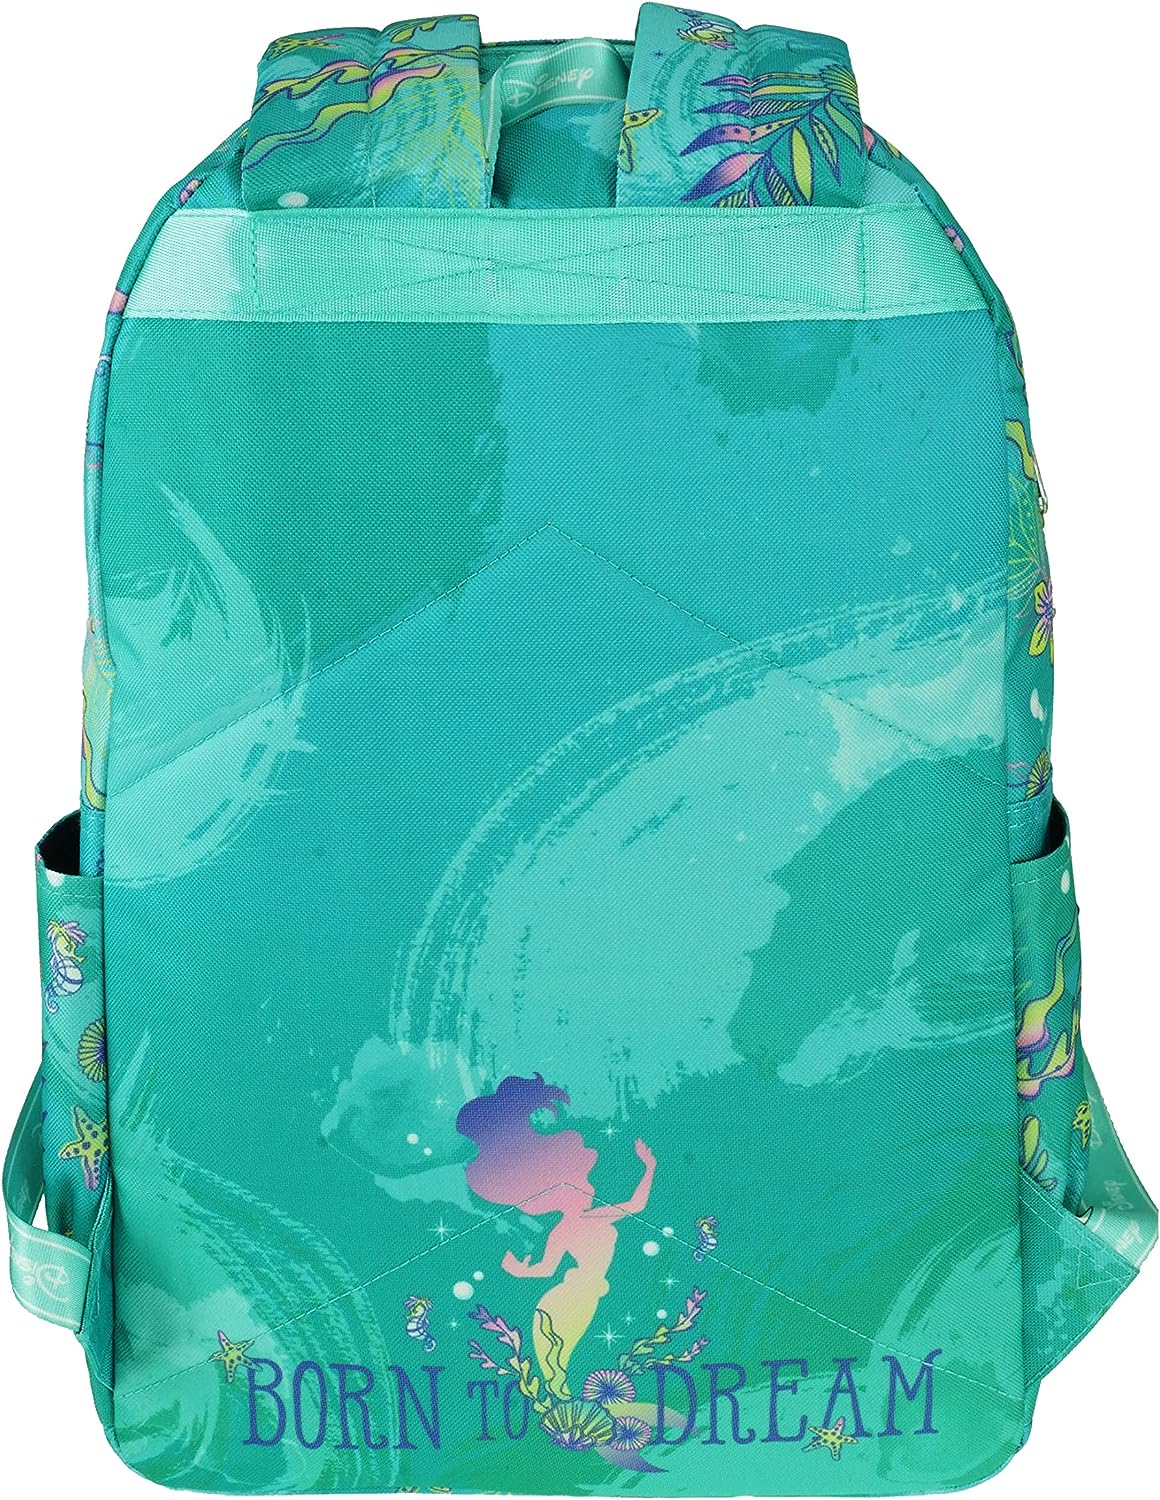 Disney Ariel Backpack with Laptop Compartment for School, Travel, and Work, Multicolor, A22206-ARIEL